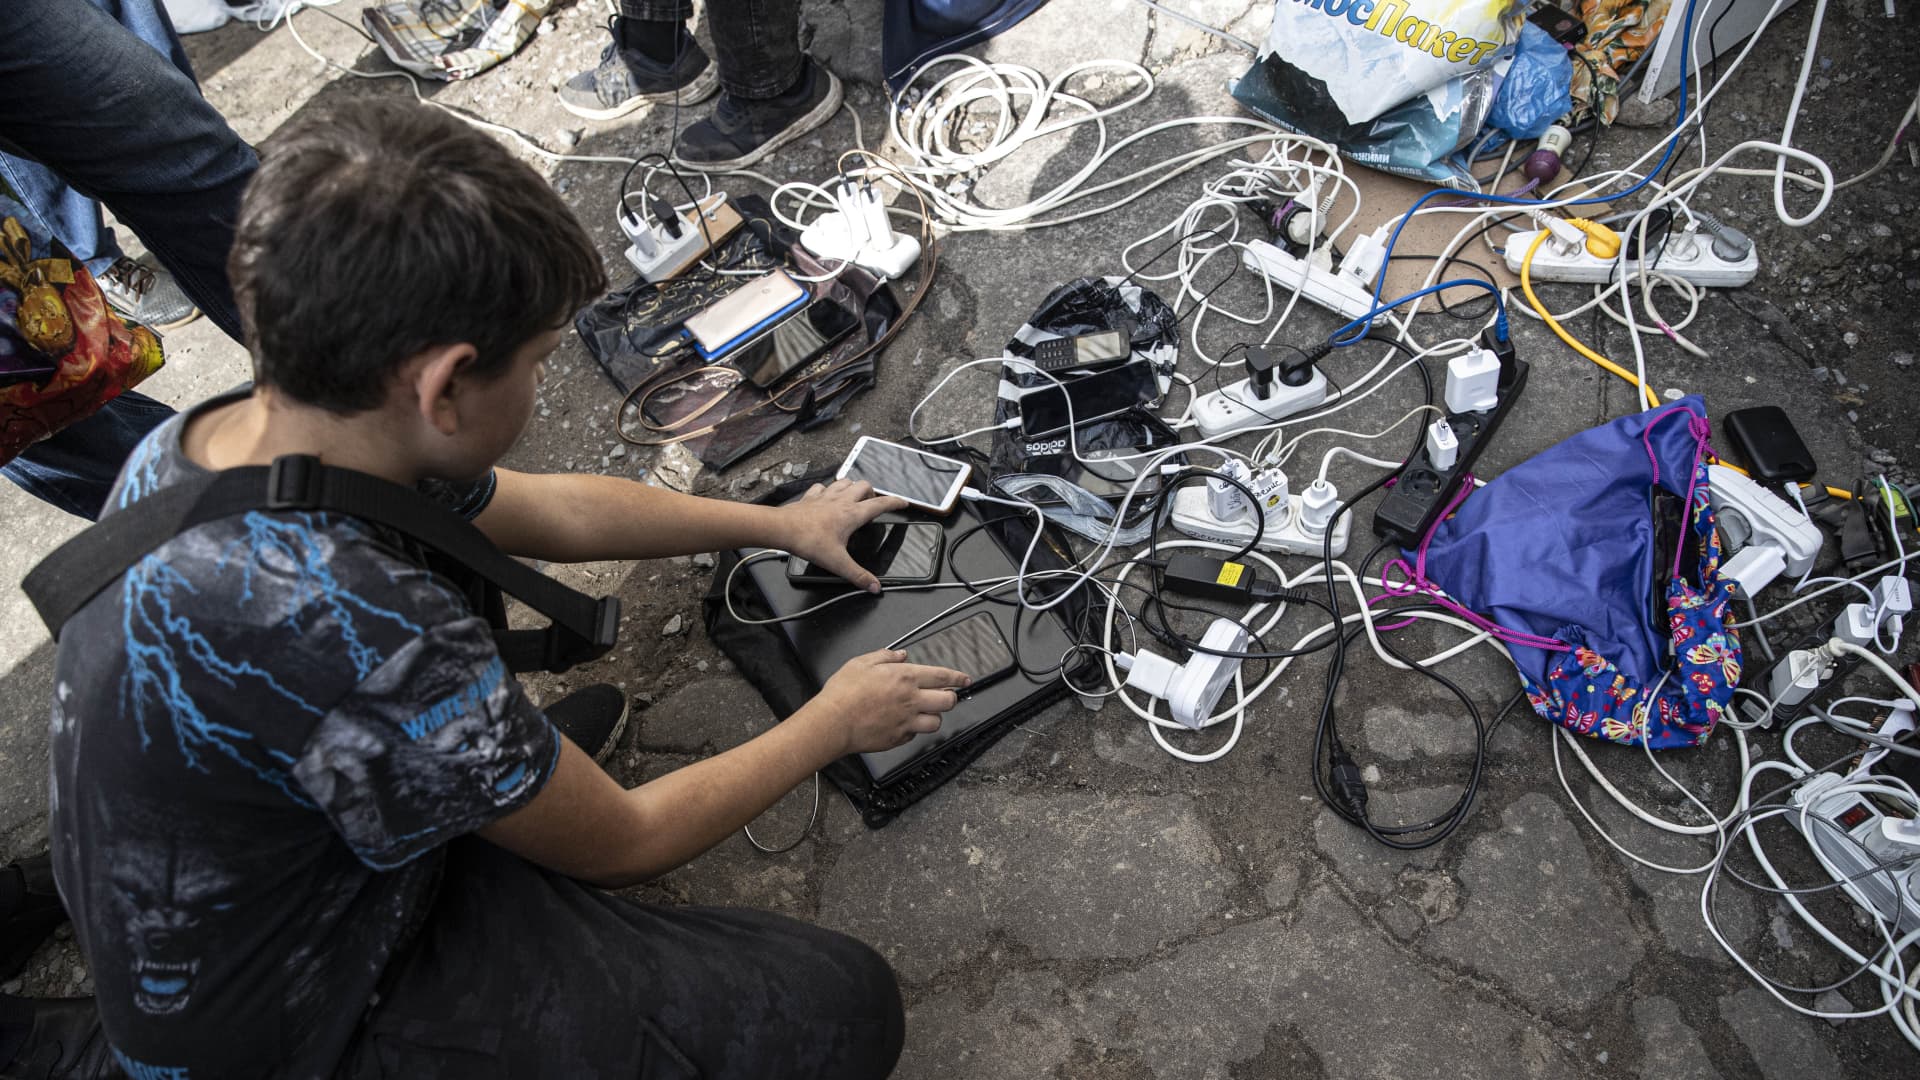 Ukrainian citizens charge their mobile phones and tablets from a generator supplied by Ukrainian soldiers after Russian Forces withdrawal from Izium as Russia-Ukraine war continues in Izium, Kharkiv Oblast, Ukraine on September 18, 2022.